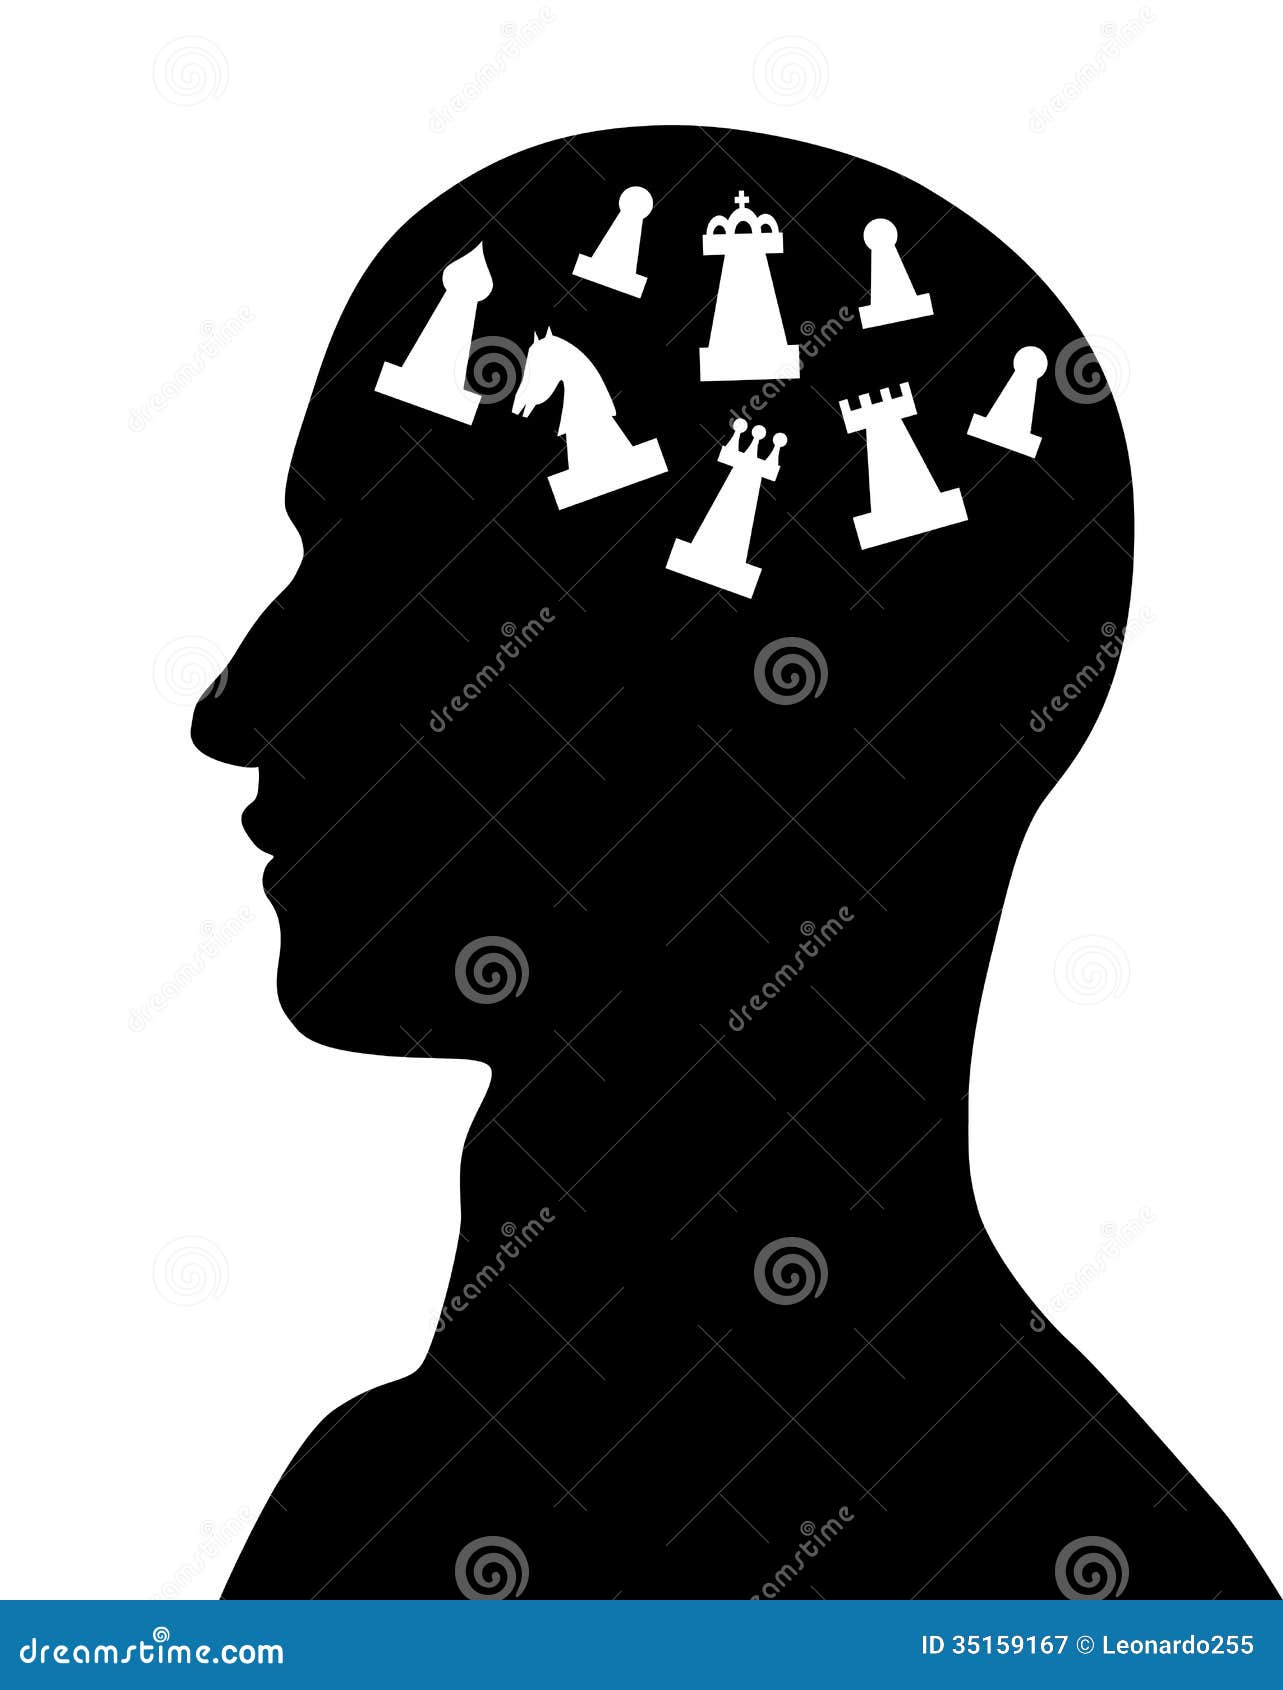 Chess in the male mind stock vector. Image of drawing 